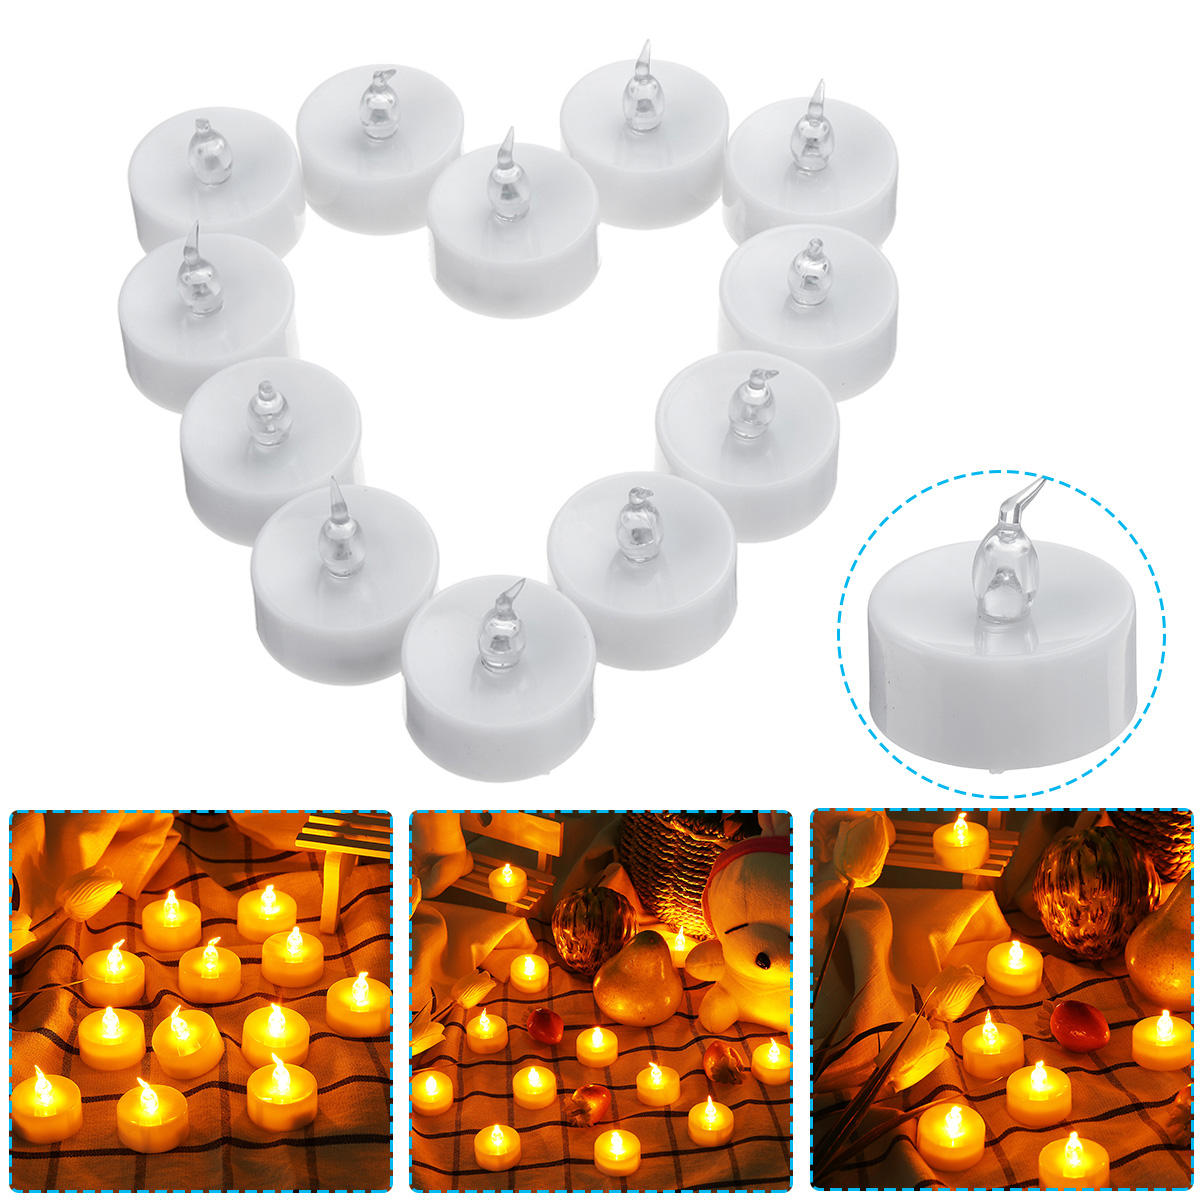 

12PCS Battery Operated Flameless Timer Votive Candle Night Light Electric Flickering LED Tea Lamp Christmas Decorations